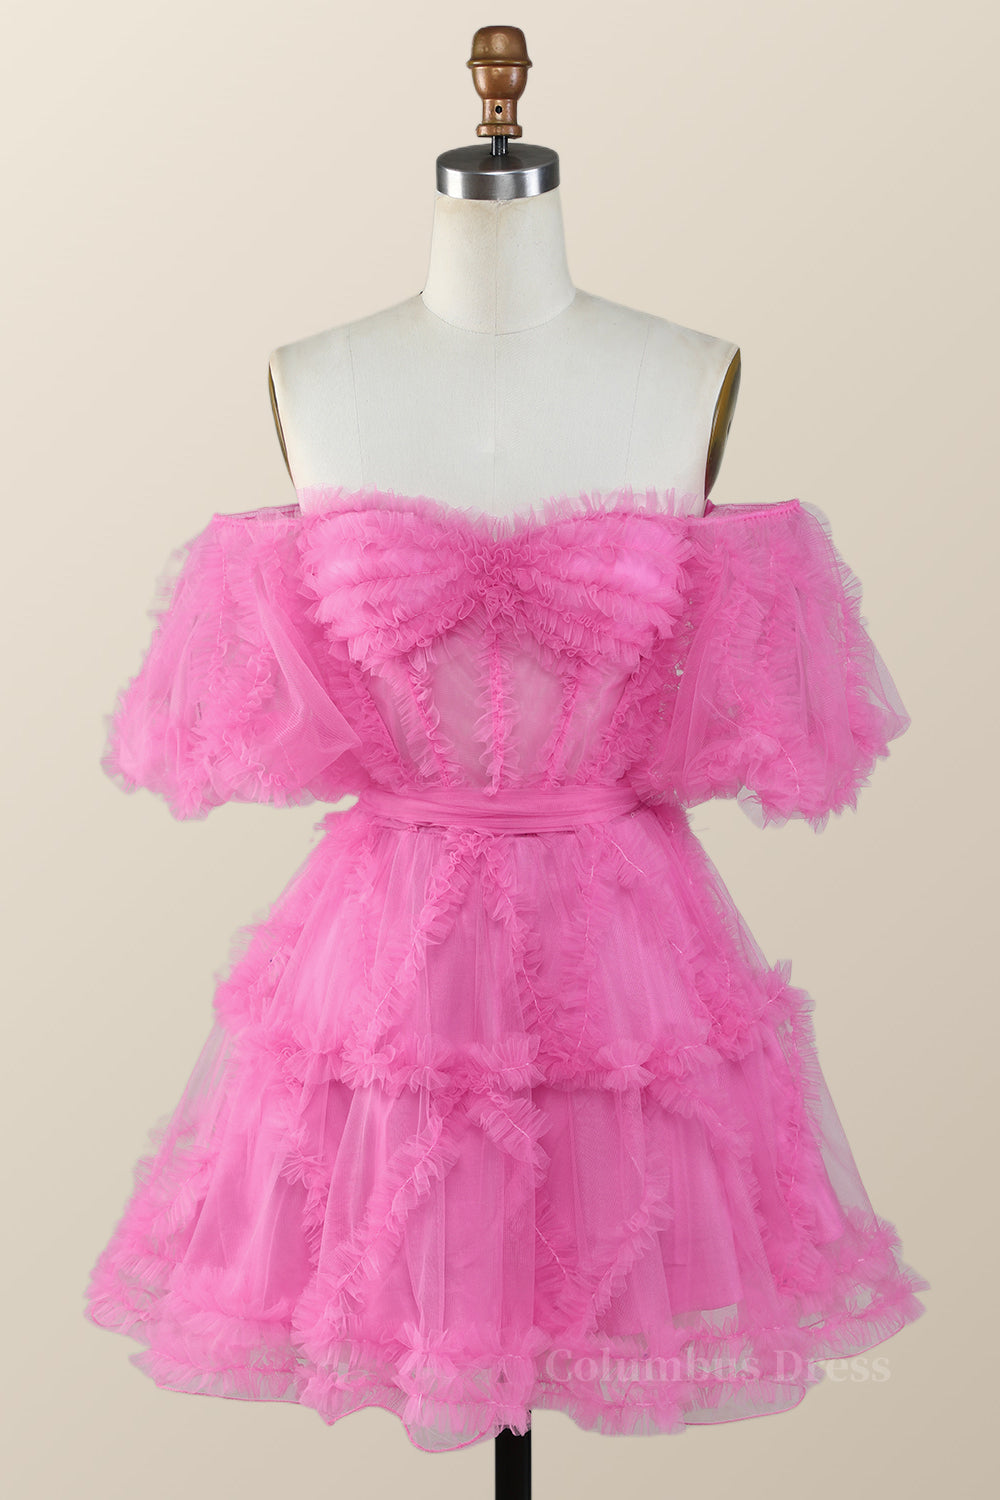 Off the Shoulder Hot Pink Ruffles Short A-line Corset Homecoming Dress outfit, Party Dress In Store